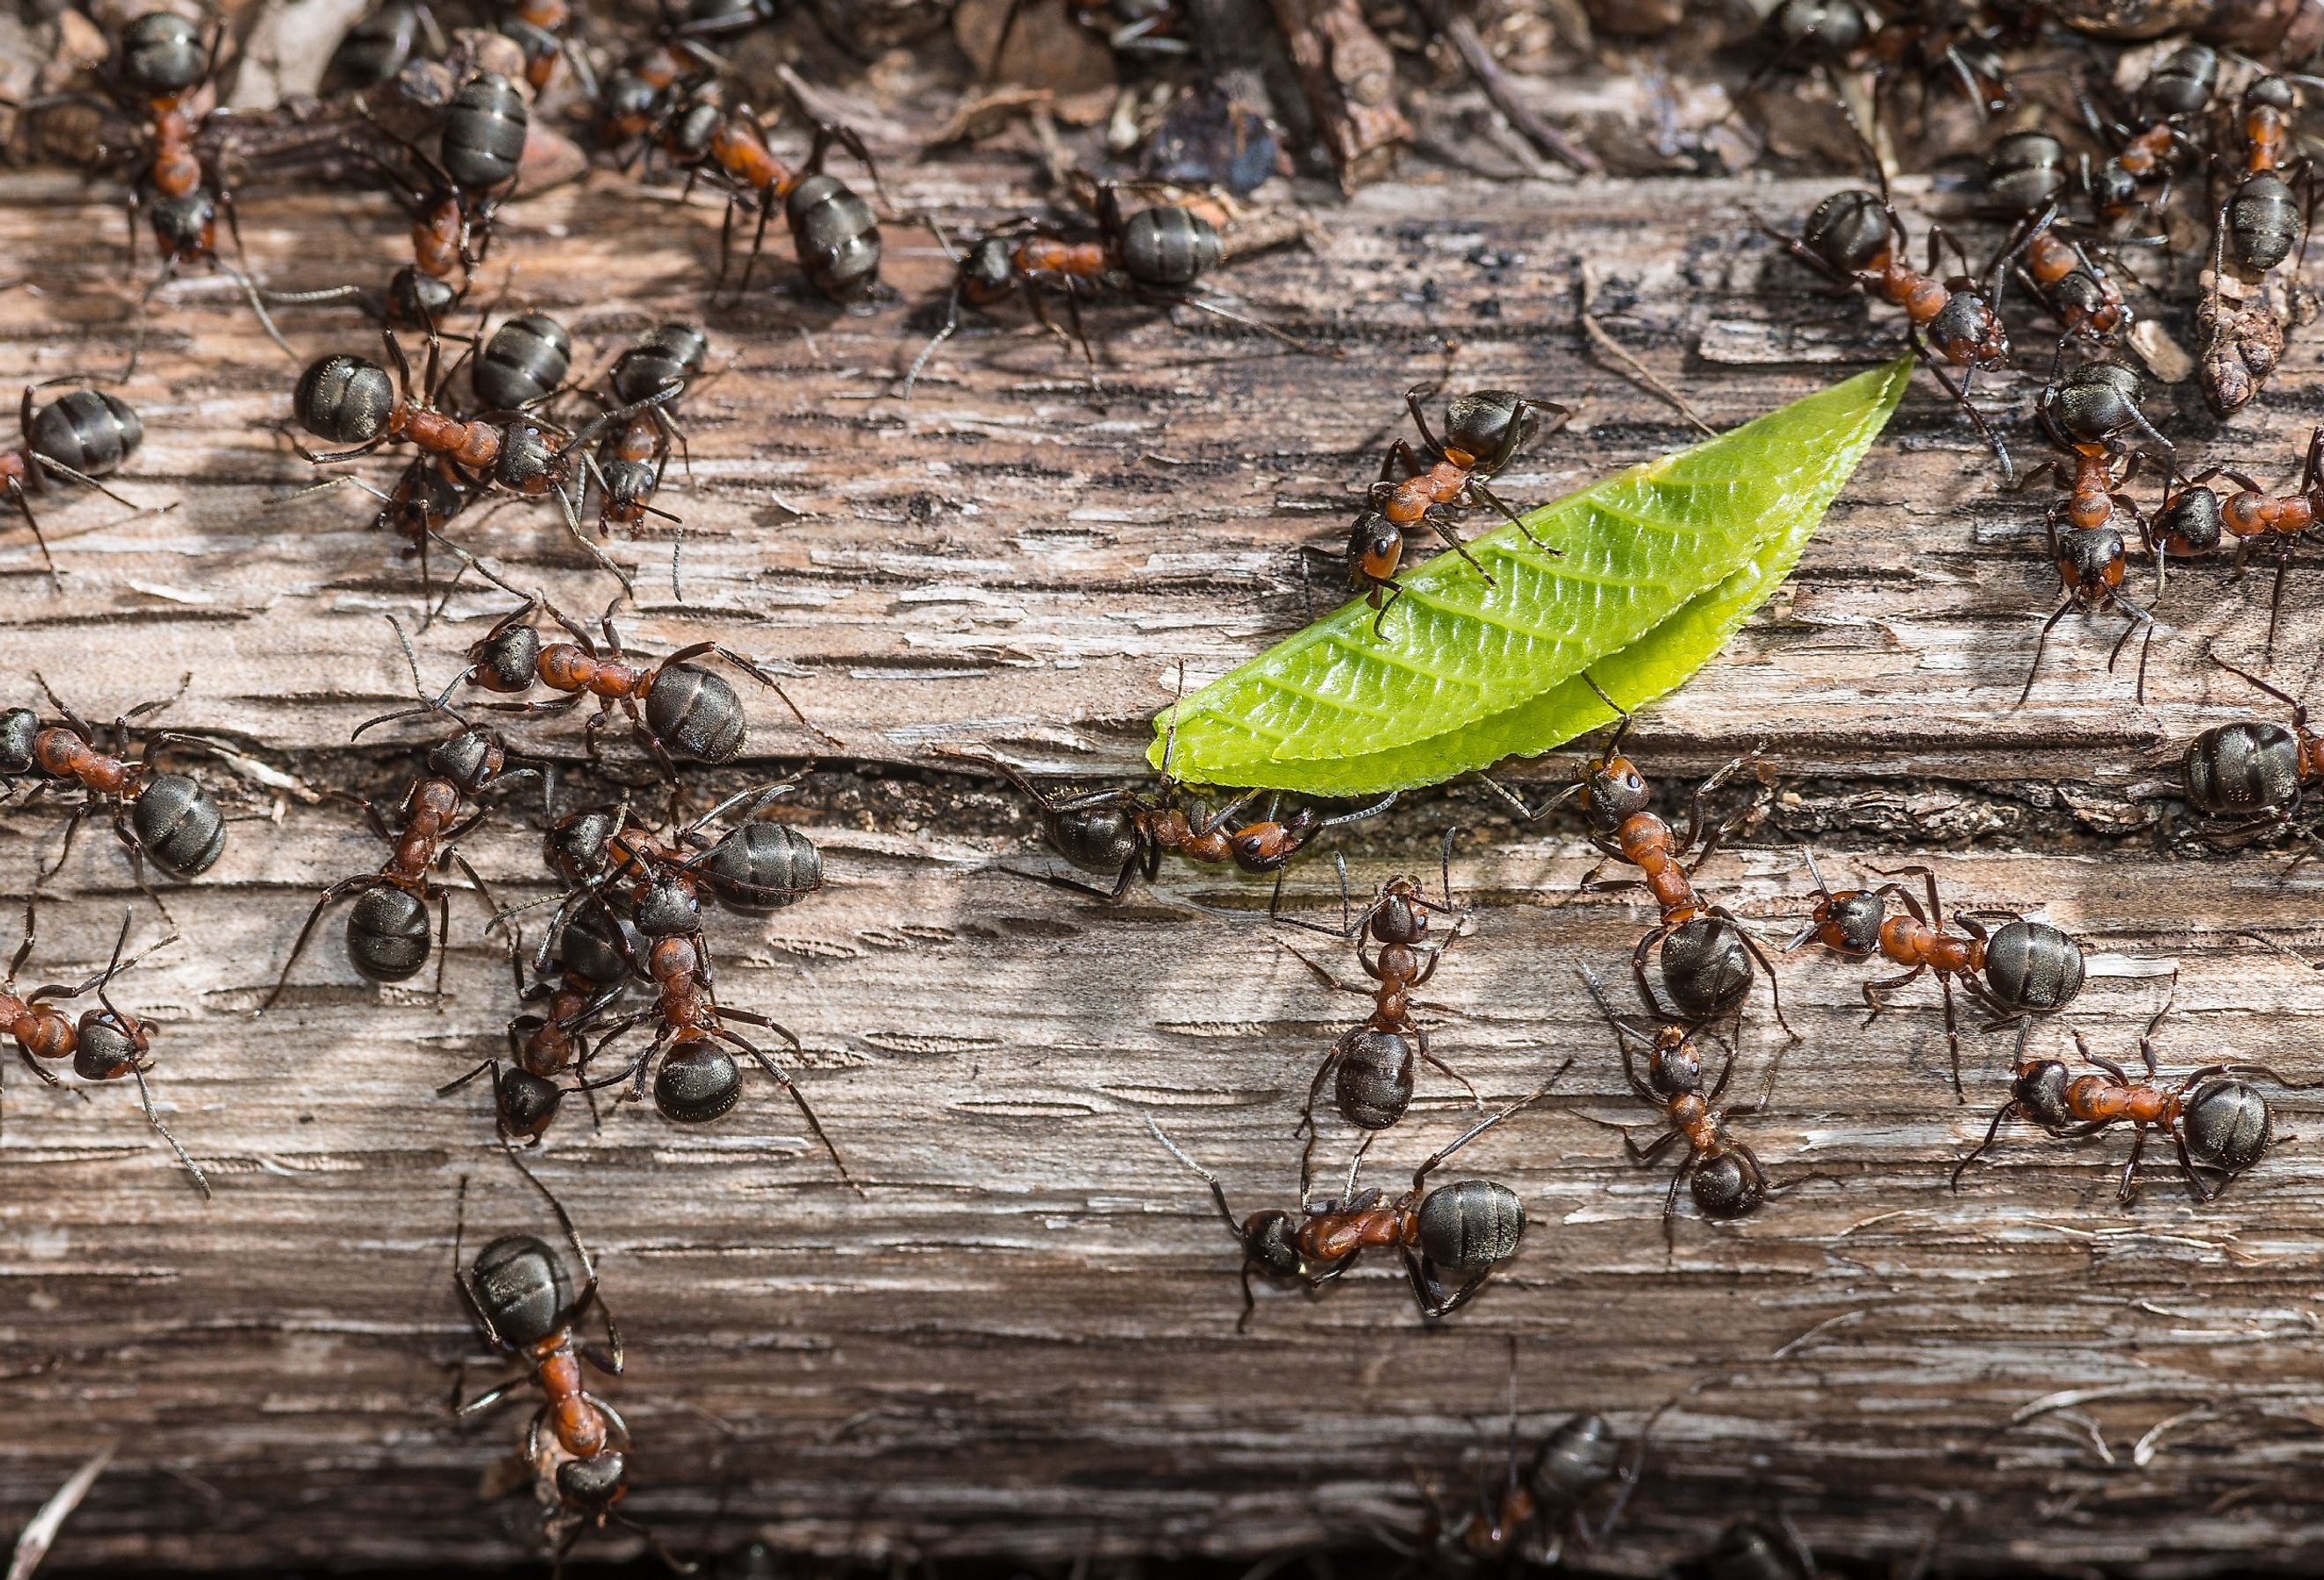 Colony of red wood ants fighting over a green leaf.